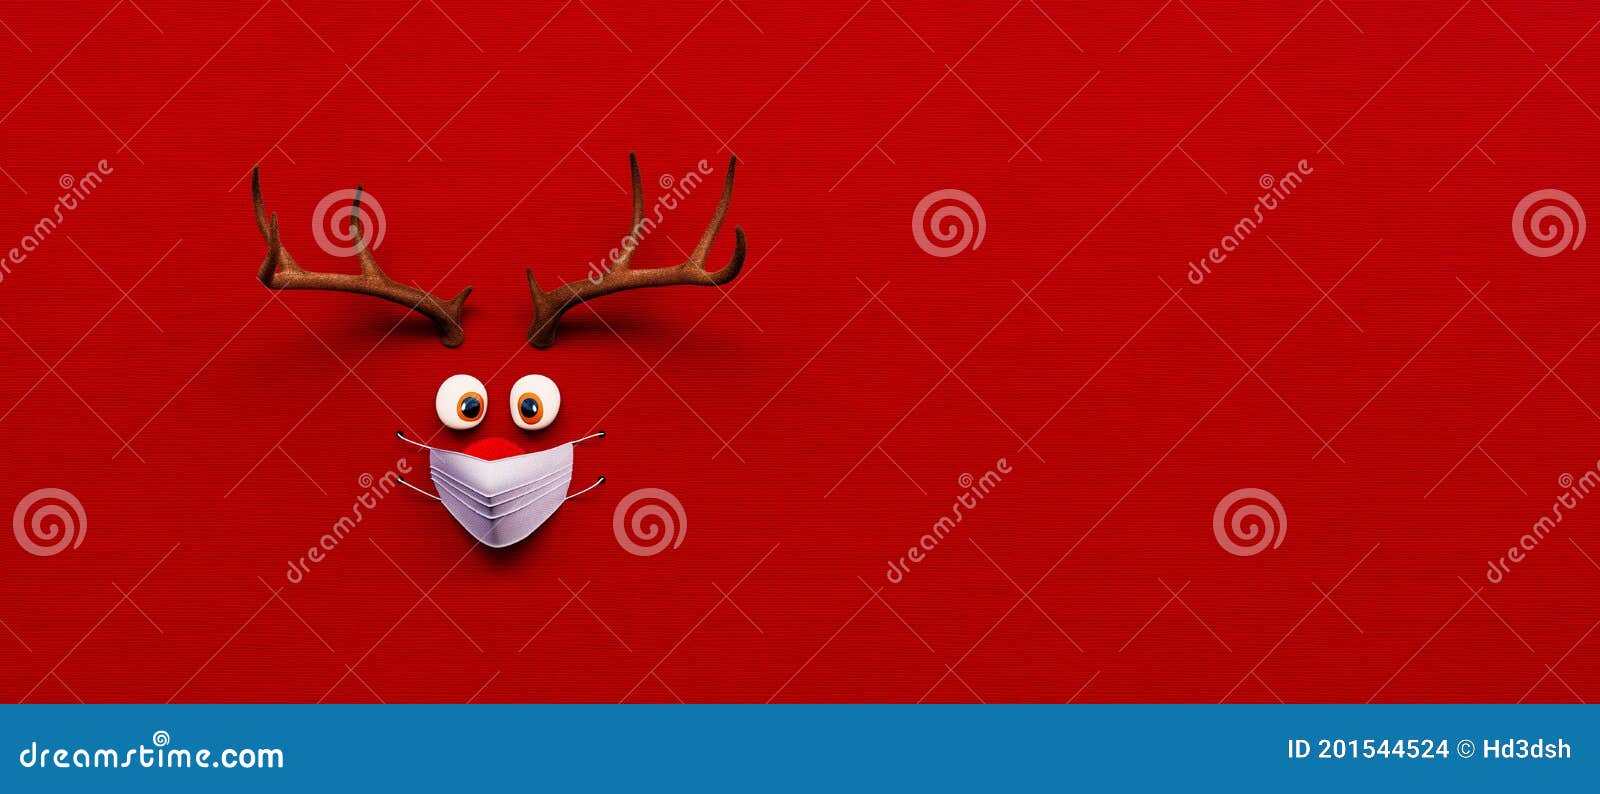 reindeer toy with cold red nose and medical mask on red christmas corona background